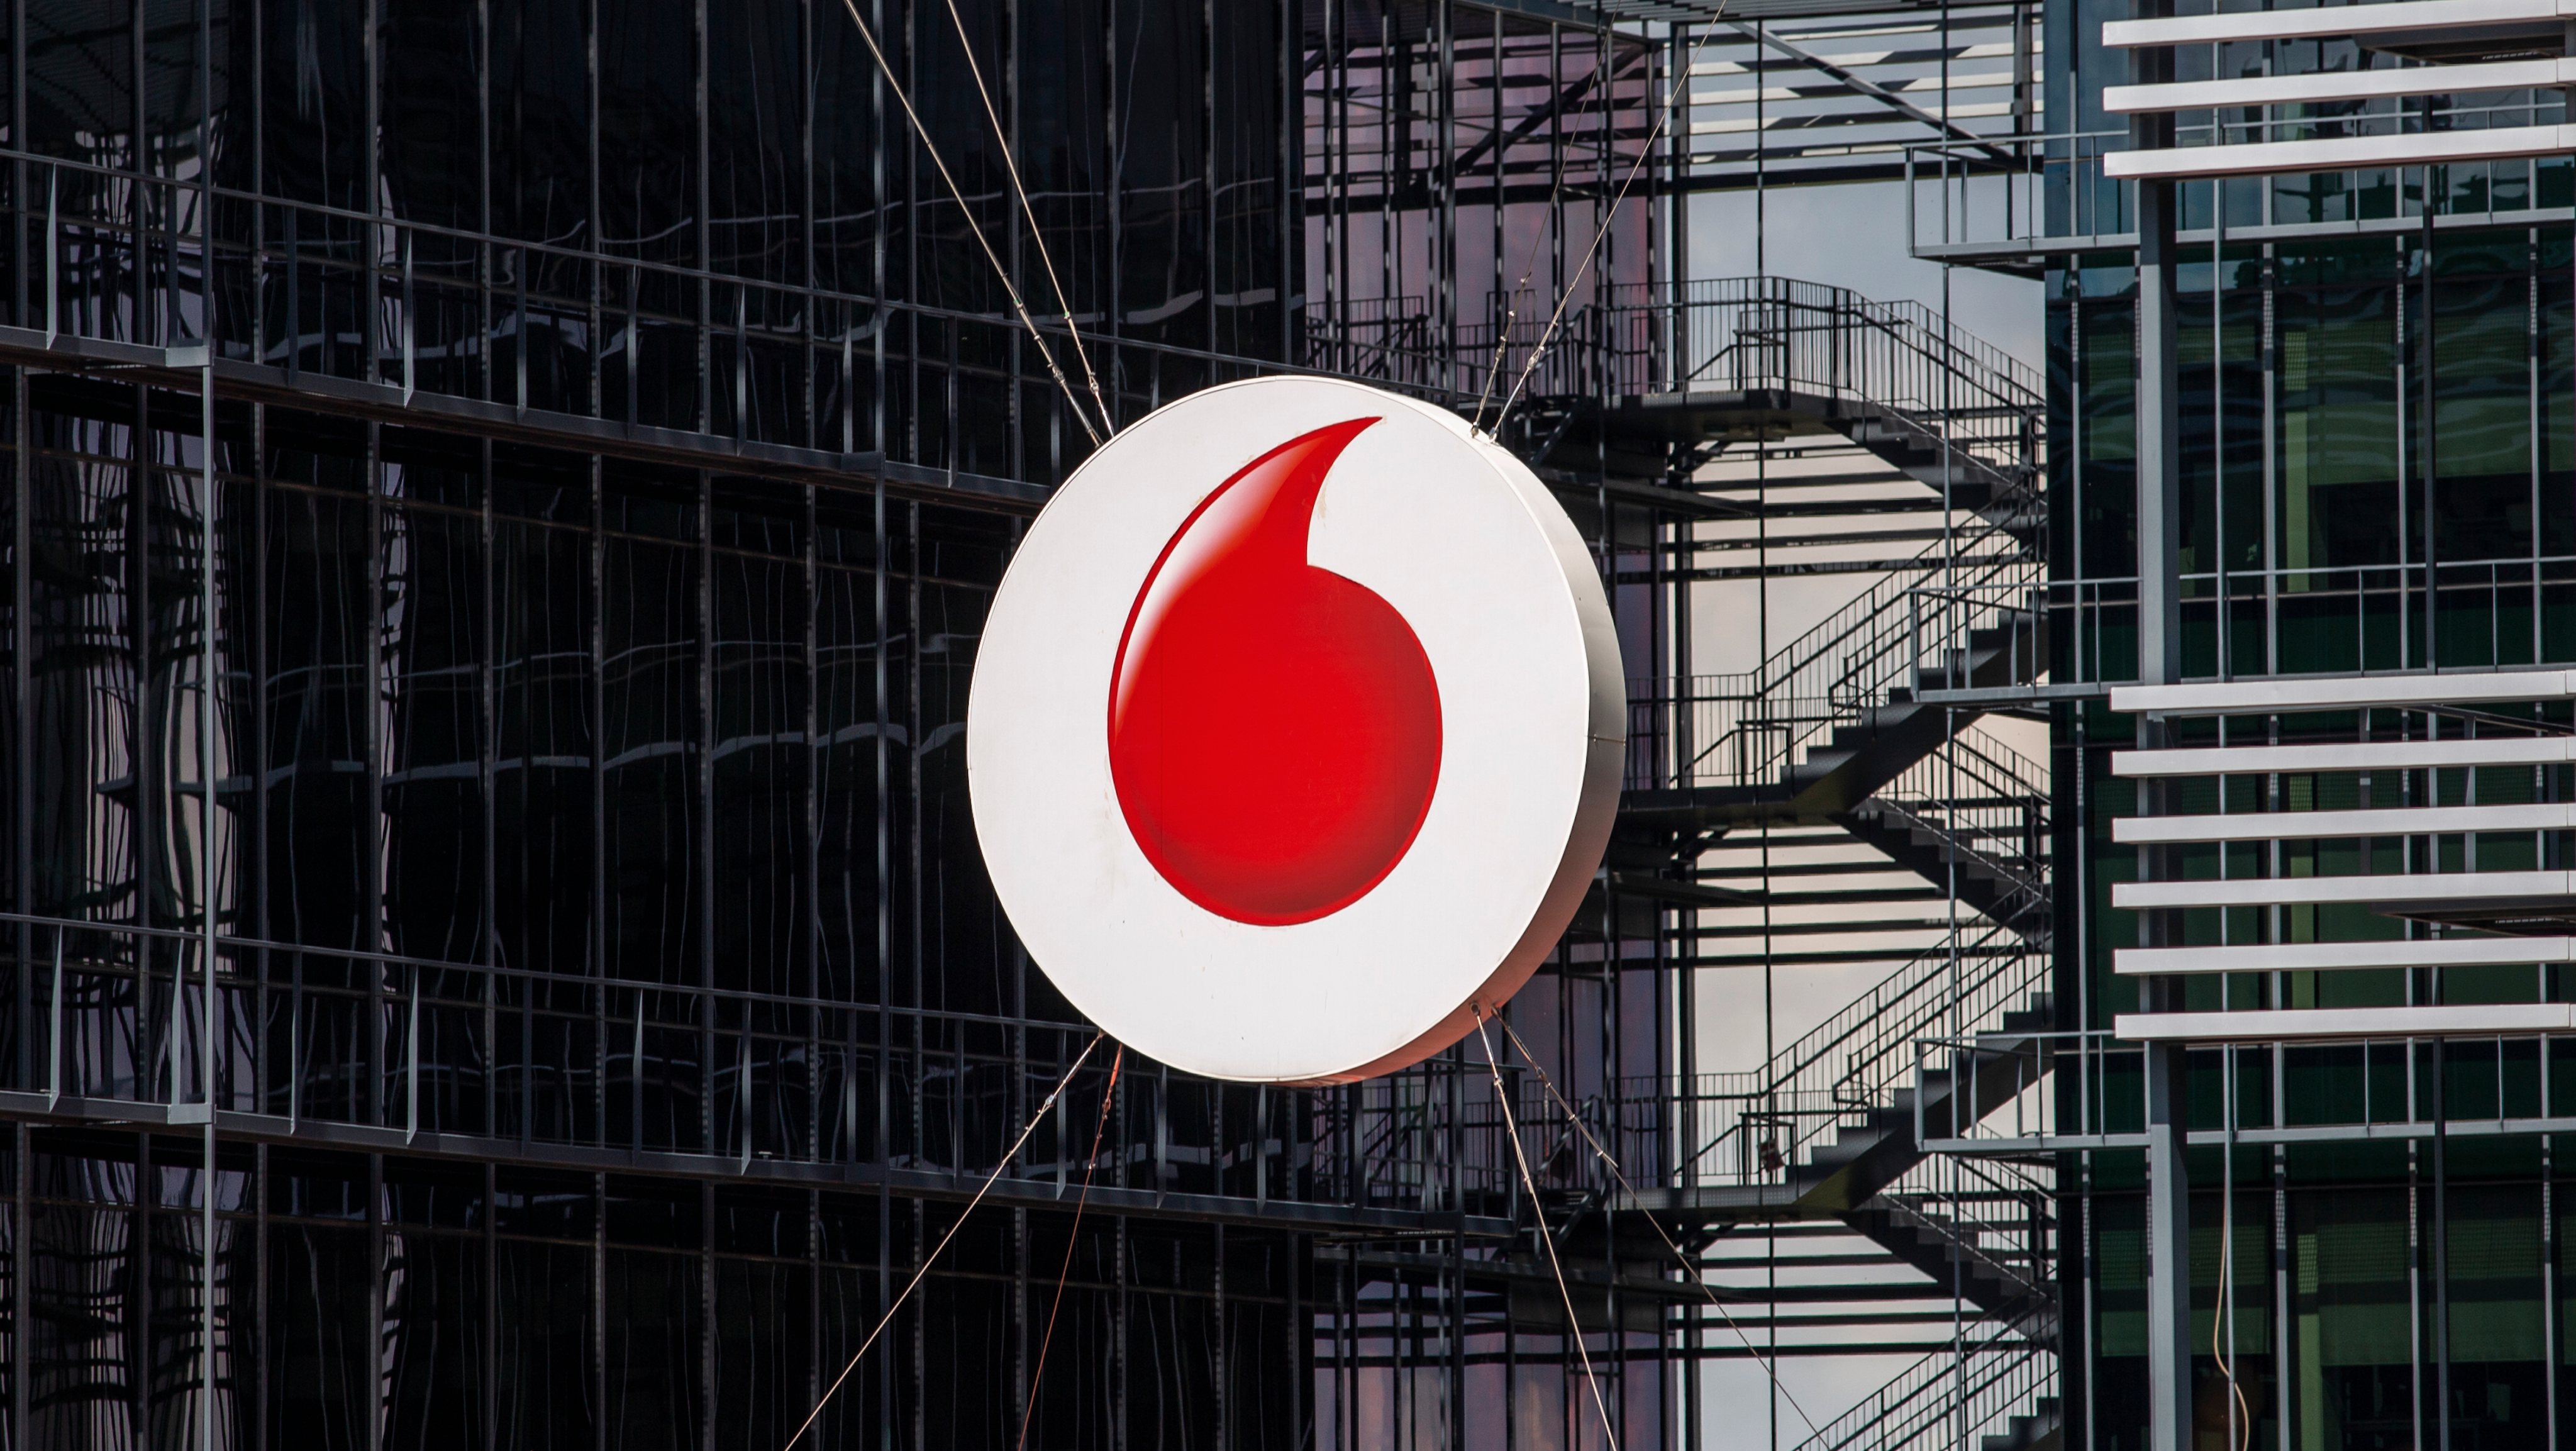 Vodafone Announces An Ere In Spain For Up To 515 Employees